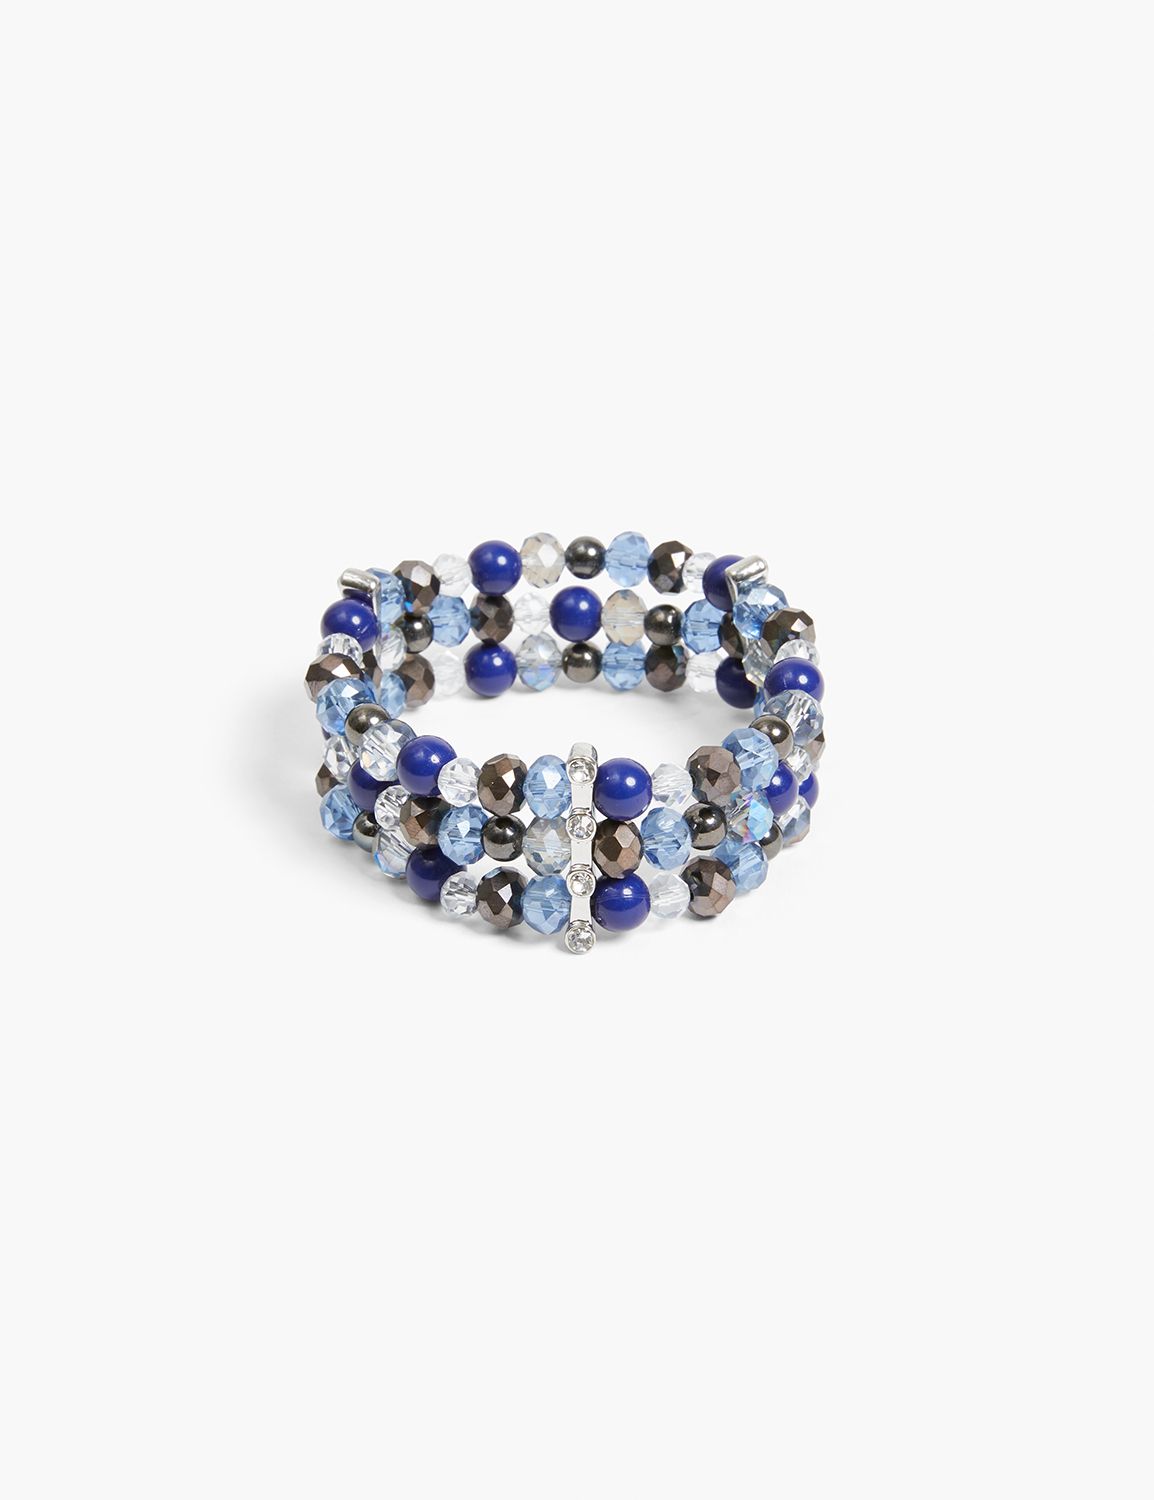 8.0 Snake Chain Bracelet + Ten (10) Pack of Assorted Blue Glass Beads -  Sexy Sparkles Fashion Jewelry